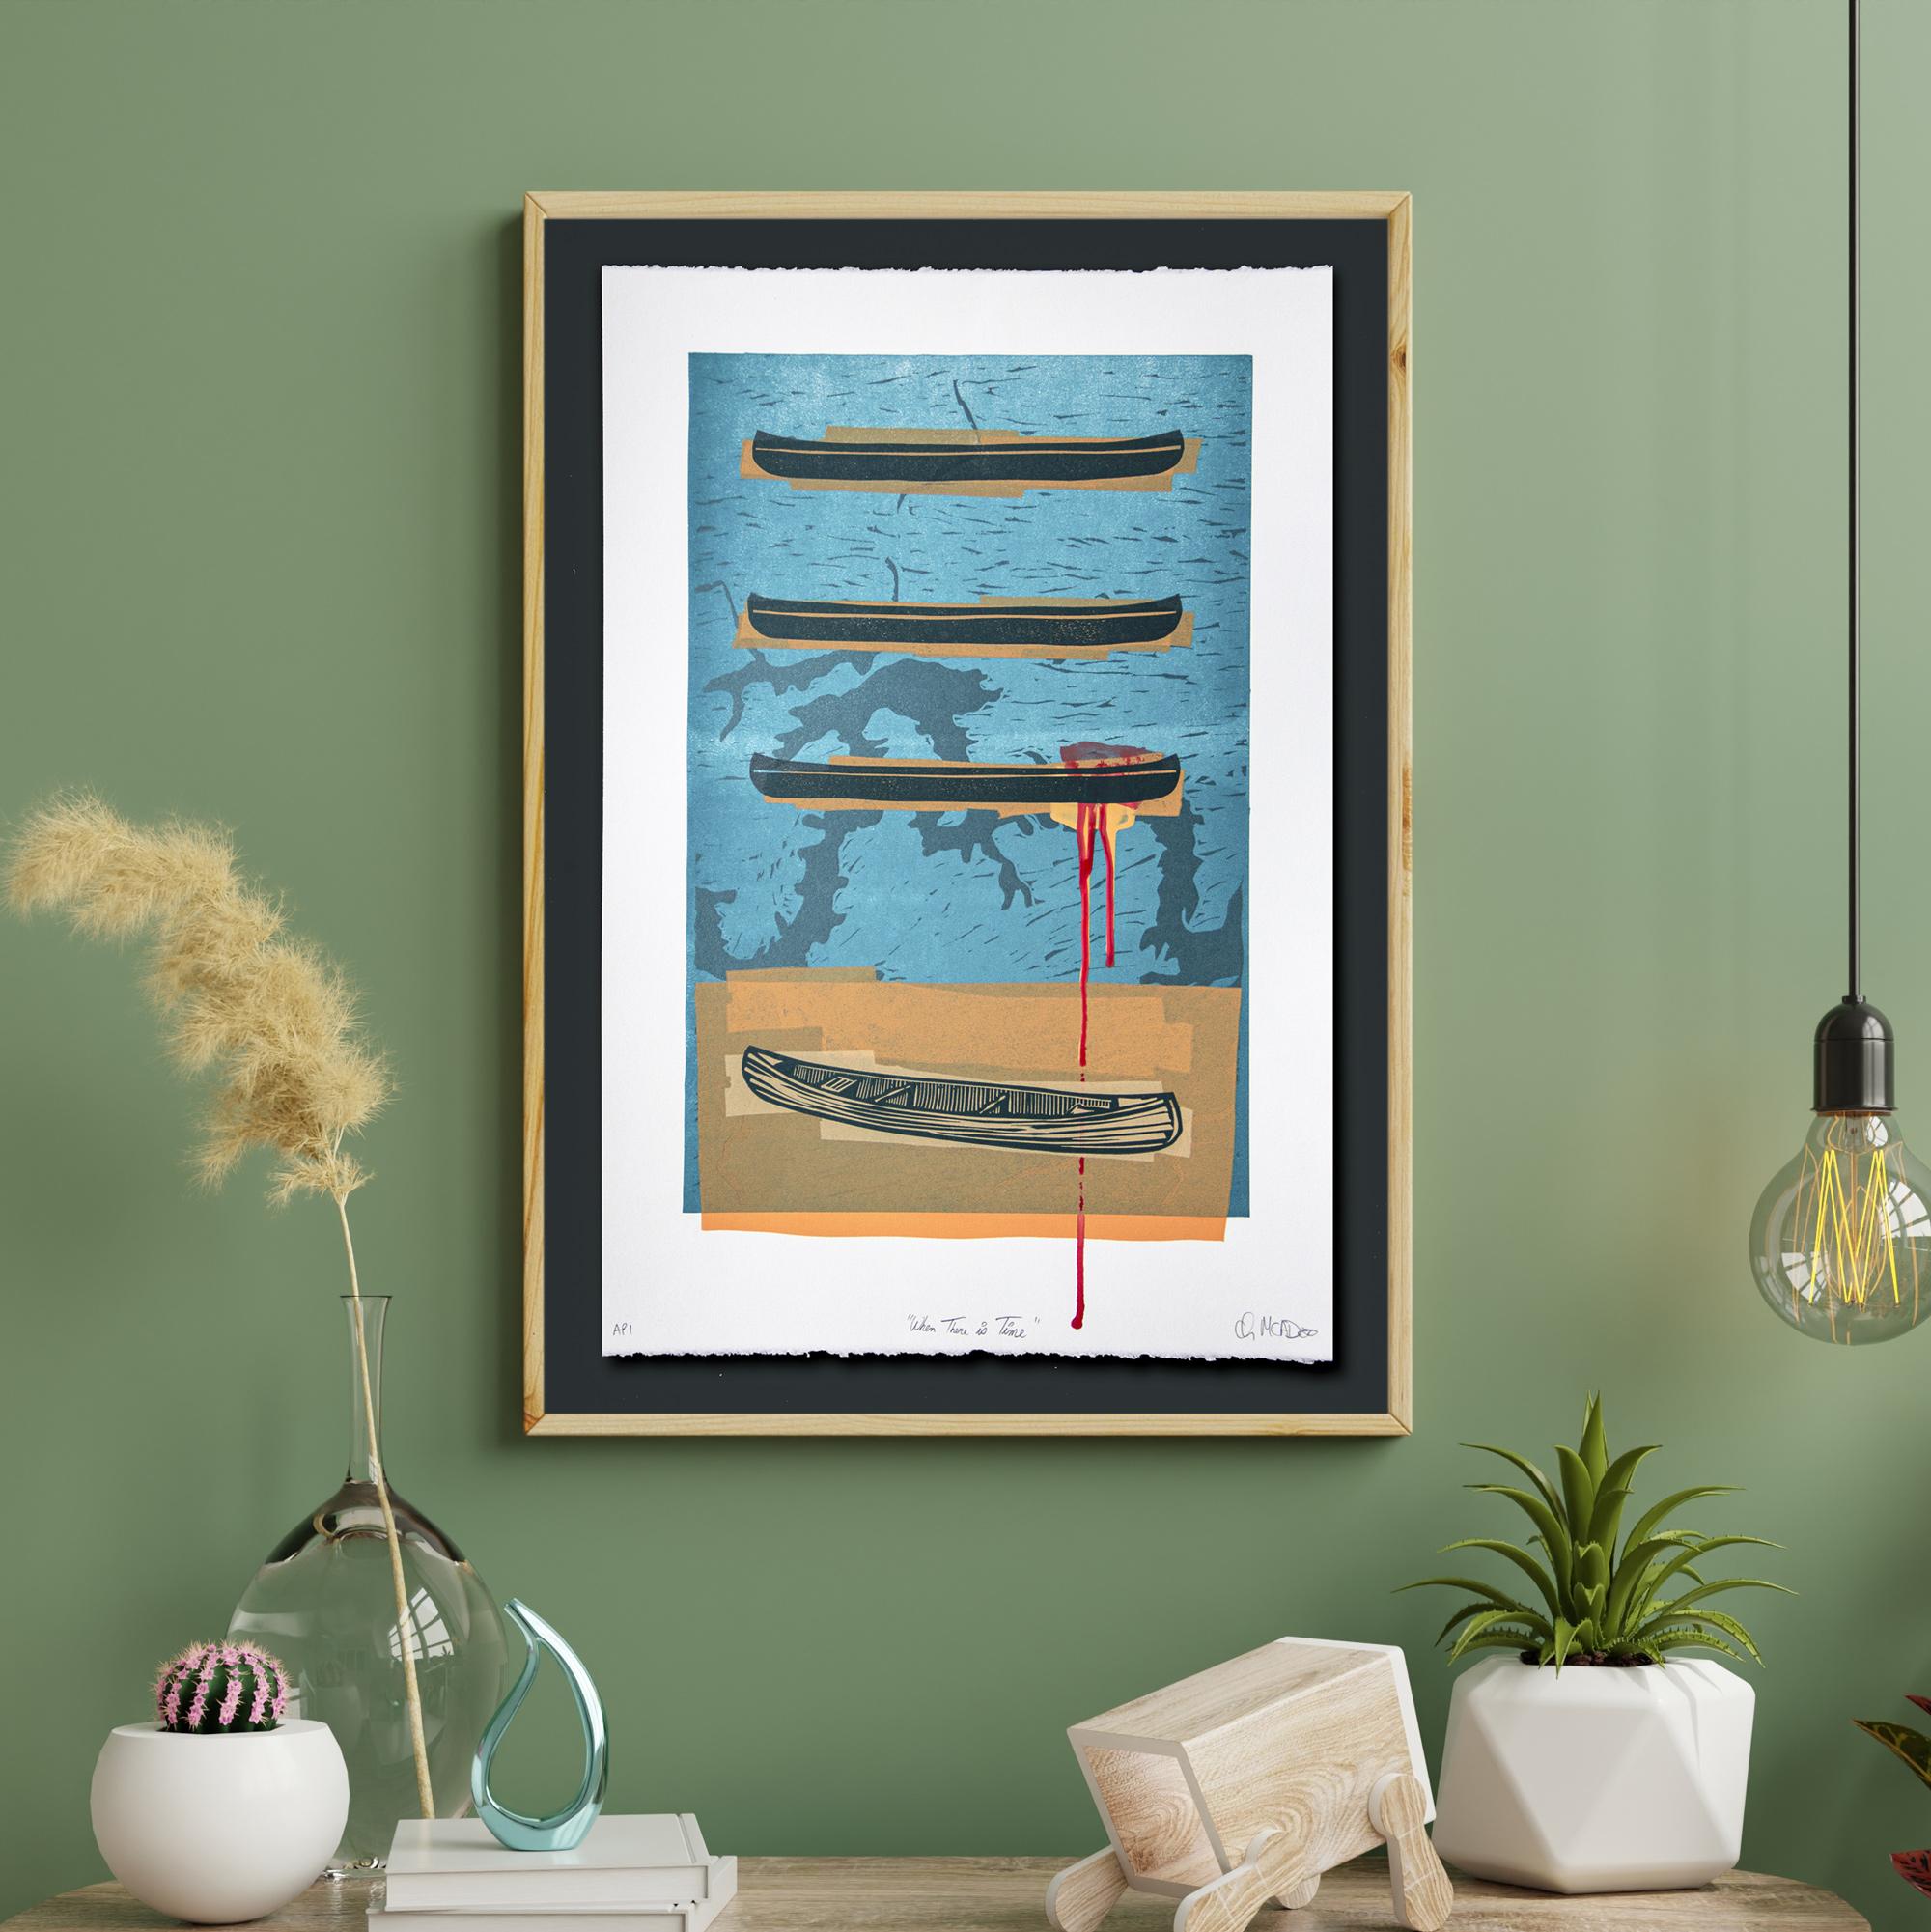 When There is Time showcases four canoes with the Tennessee River in the background, running through Knox County, TN. Each print was painstakingly carved and printed one color at a time on an 80 year old Vandercook proof press. The boat has become a